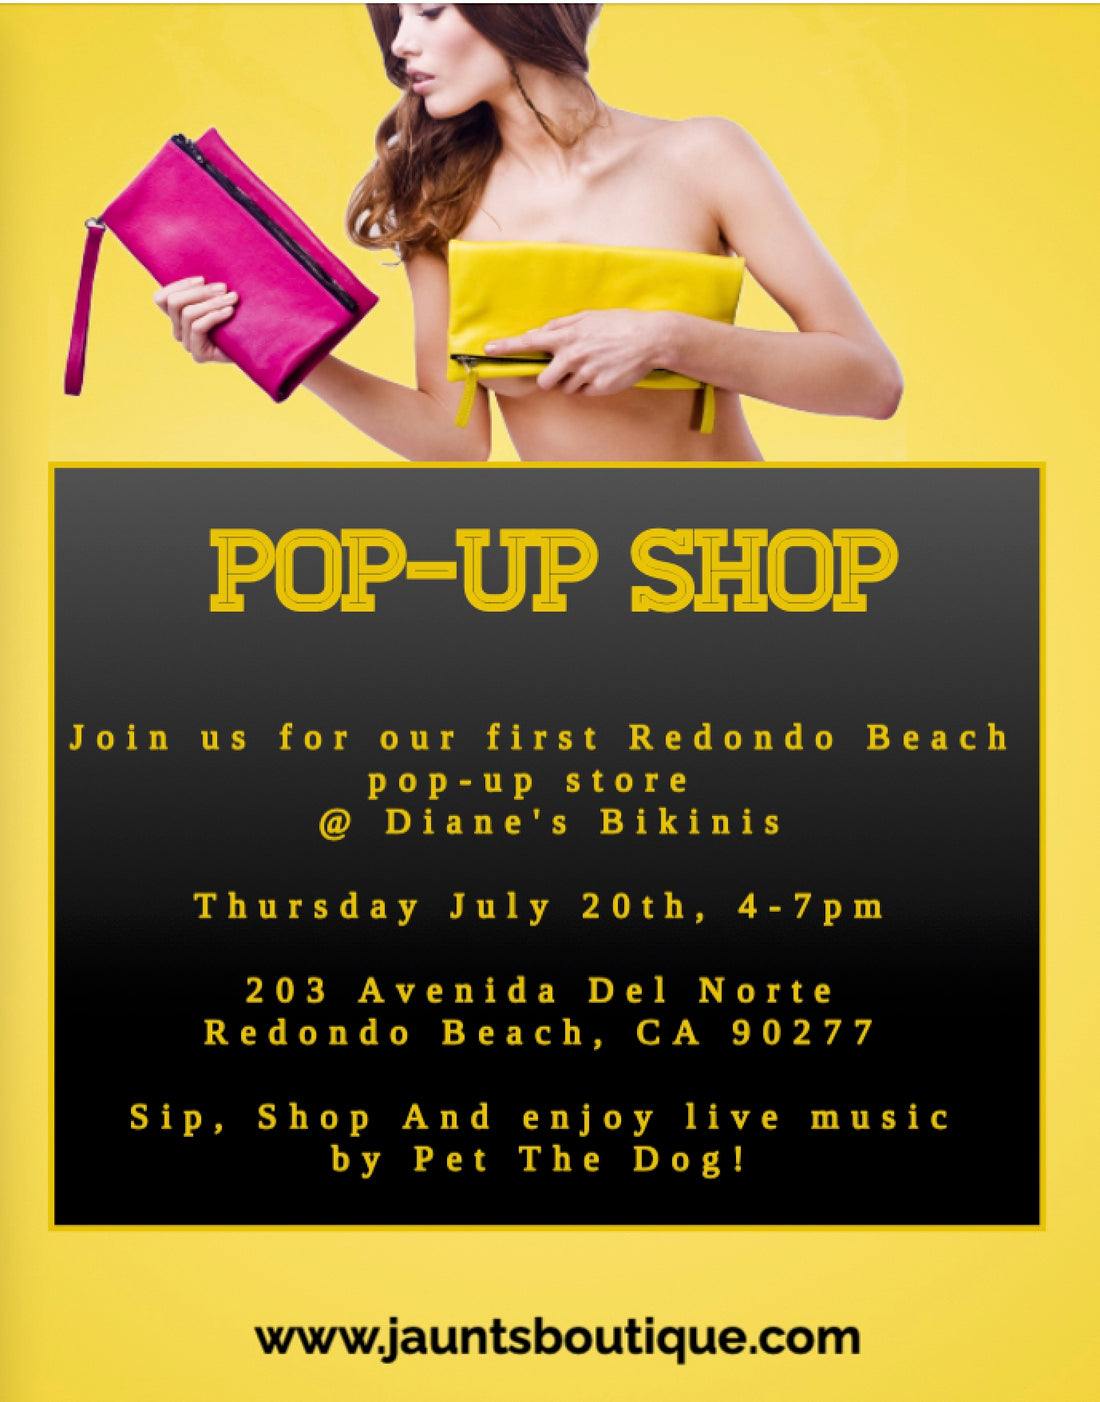 Join us for our POP-UP Store Thursday July 20th from 4-7pm @ Diane's Bikinis "Riviera Village"